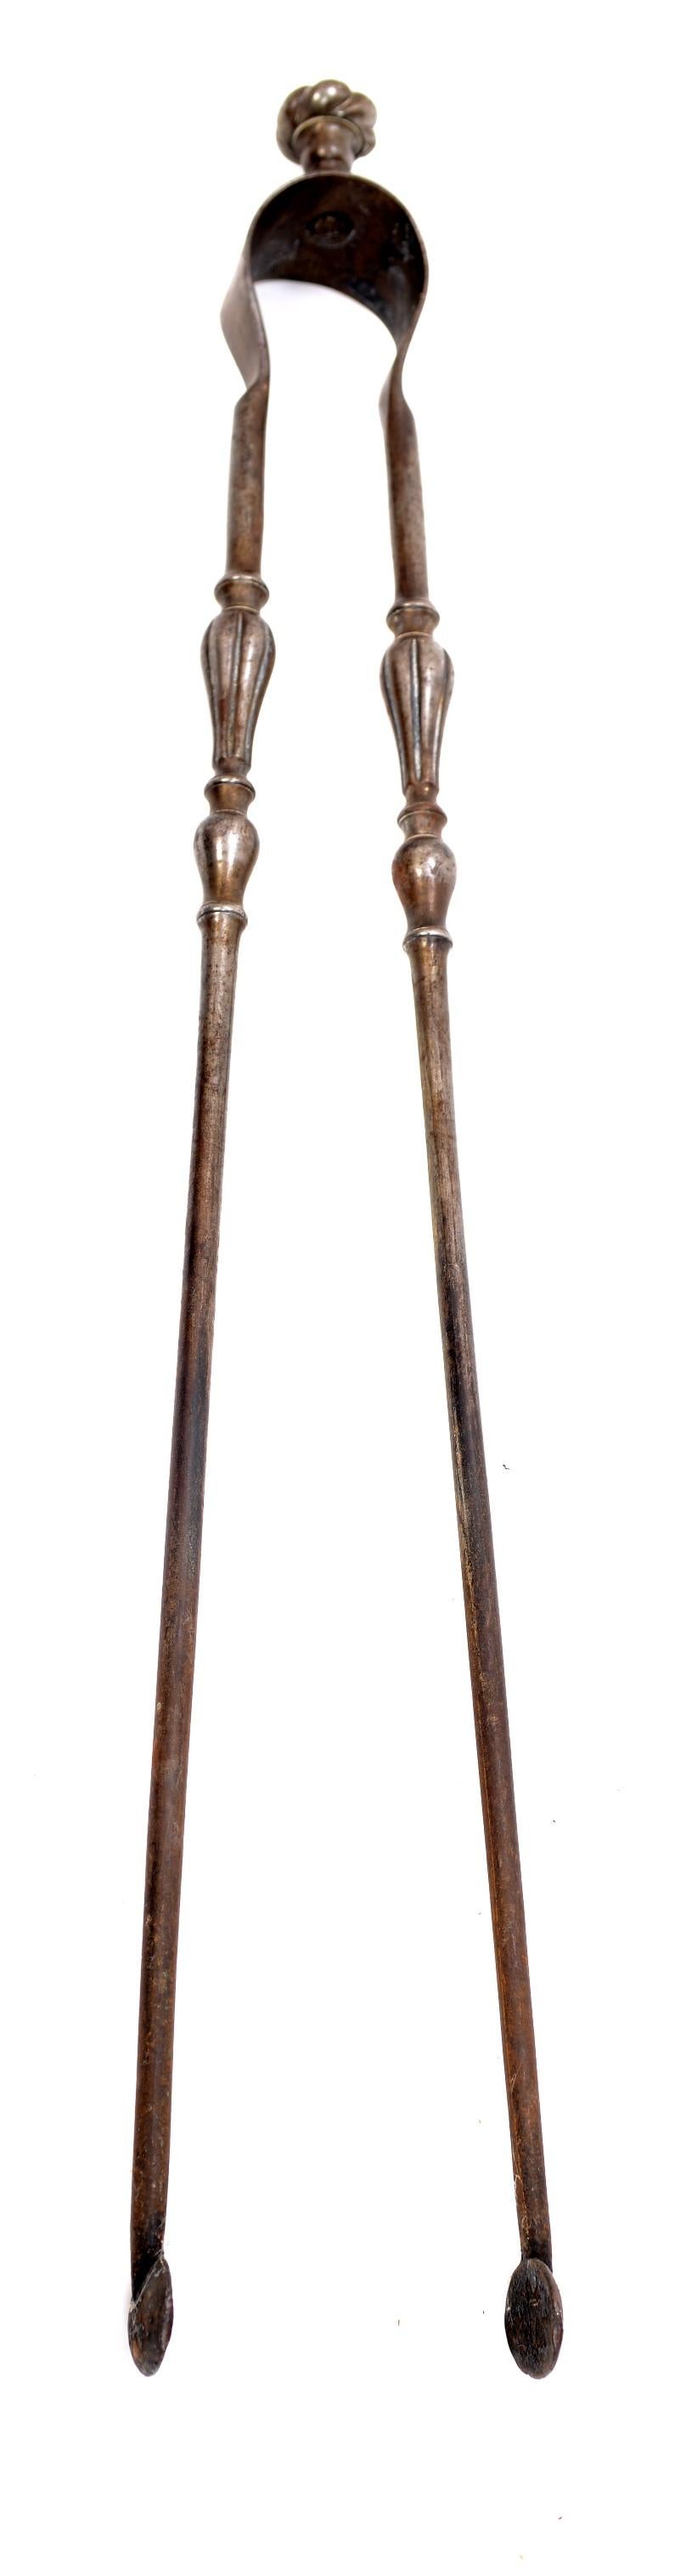 English fireplace tools, polished steel, late 18th-early 19th century. With beautiful turned finial.